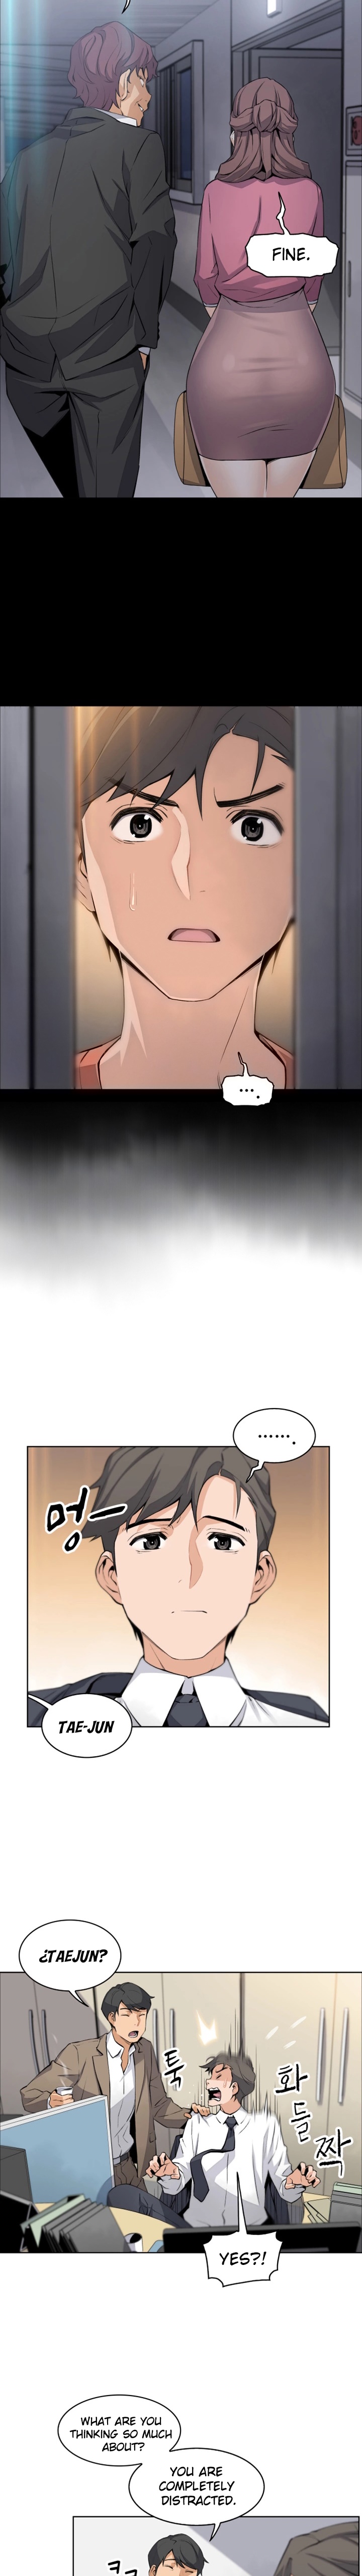 Housekeeper Manhwa - Chapter 14 Page 2